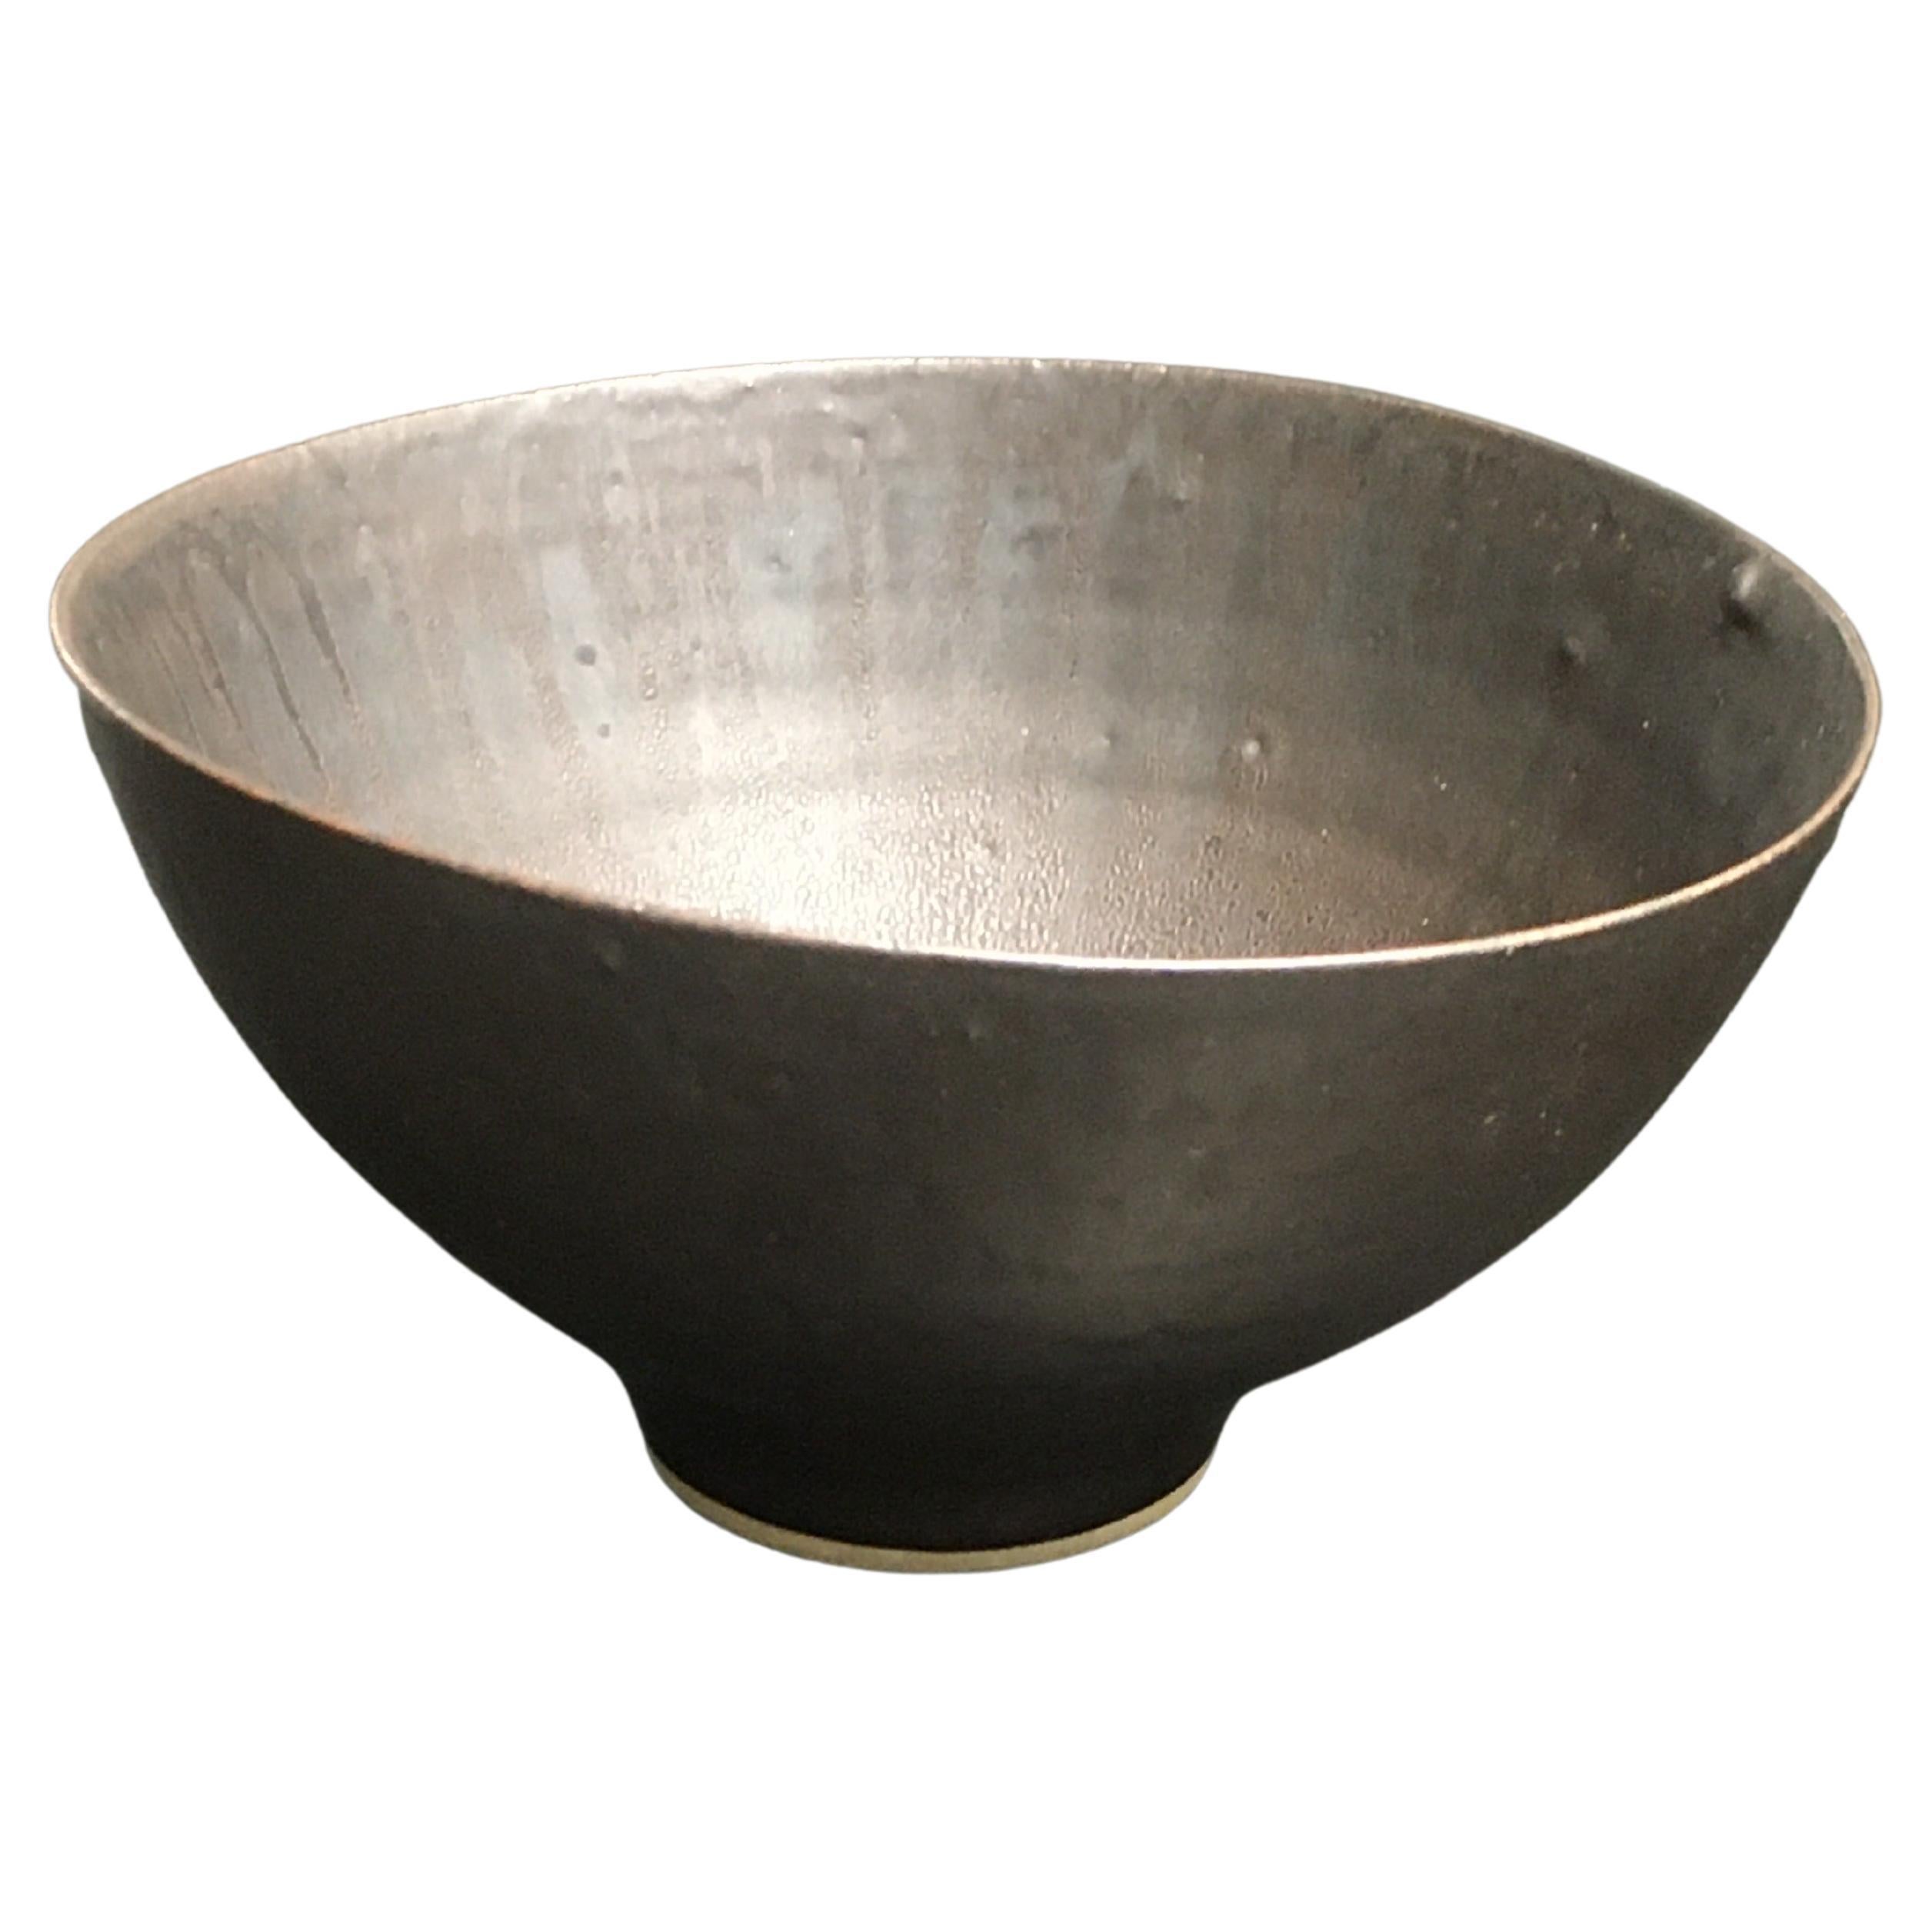 English Dame Lucie Rie, 1950's Porcelain Footed Bowl with Manganese Glaze. For Sale